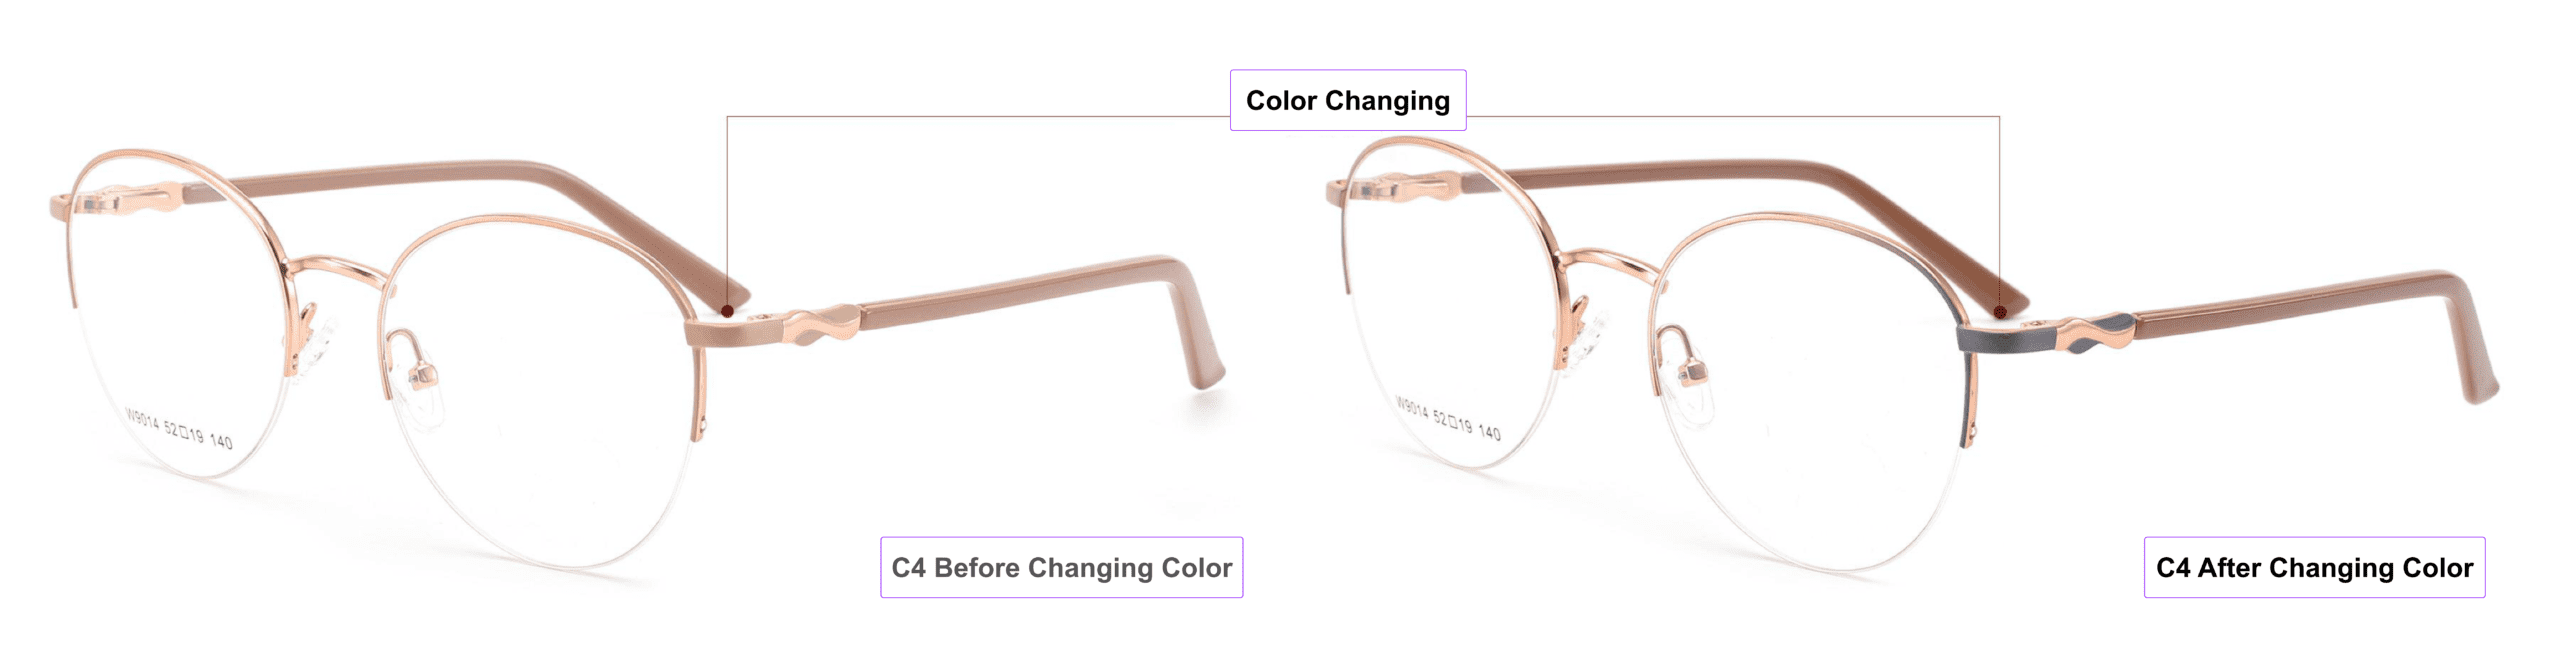 UV-activated Color Changing Glasses Frames, grey, brown, pink gold, process of color changing